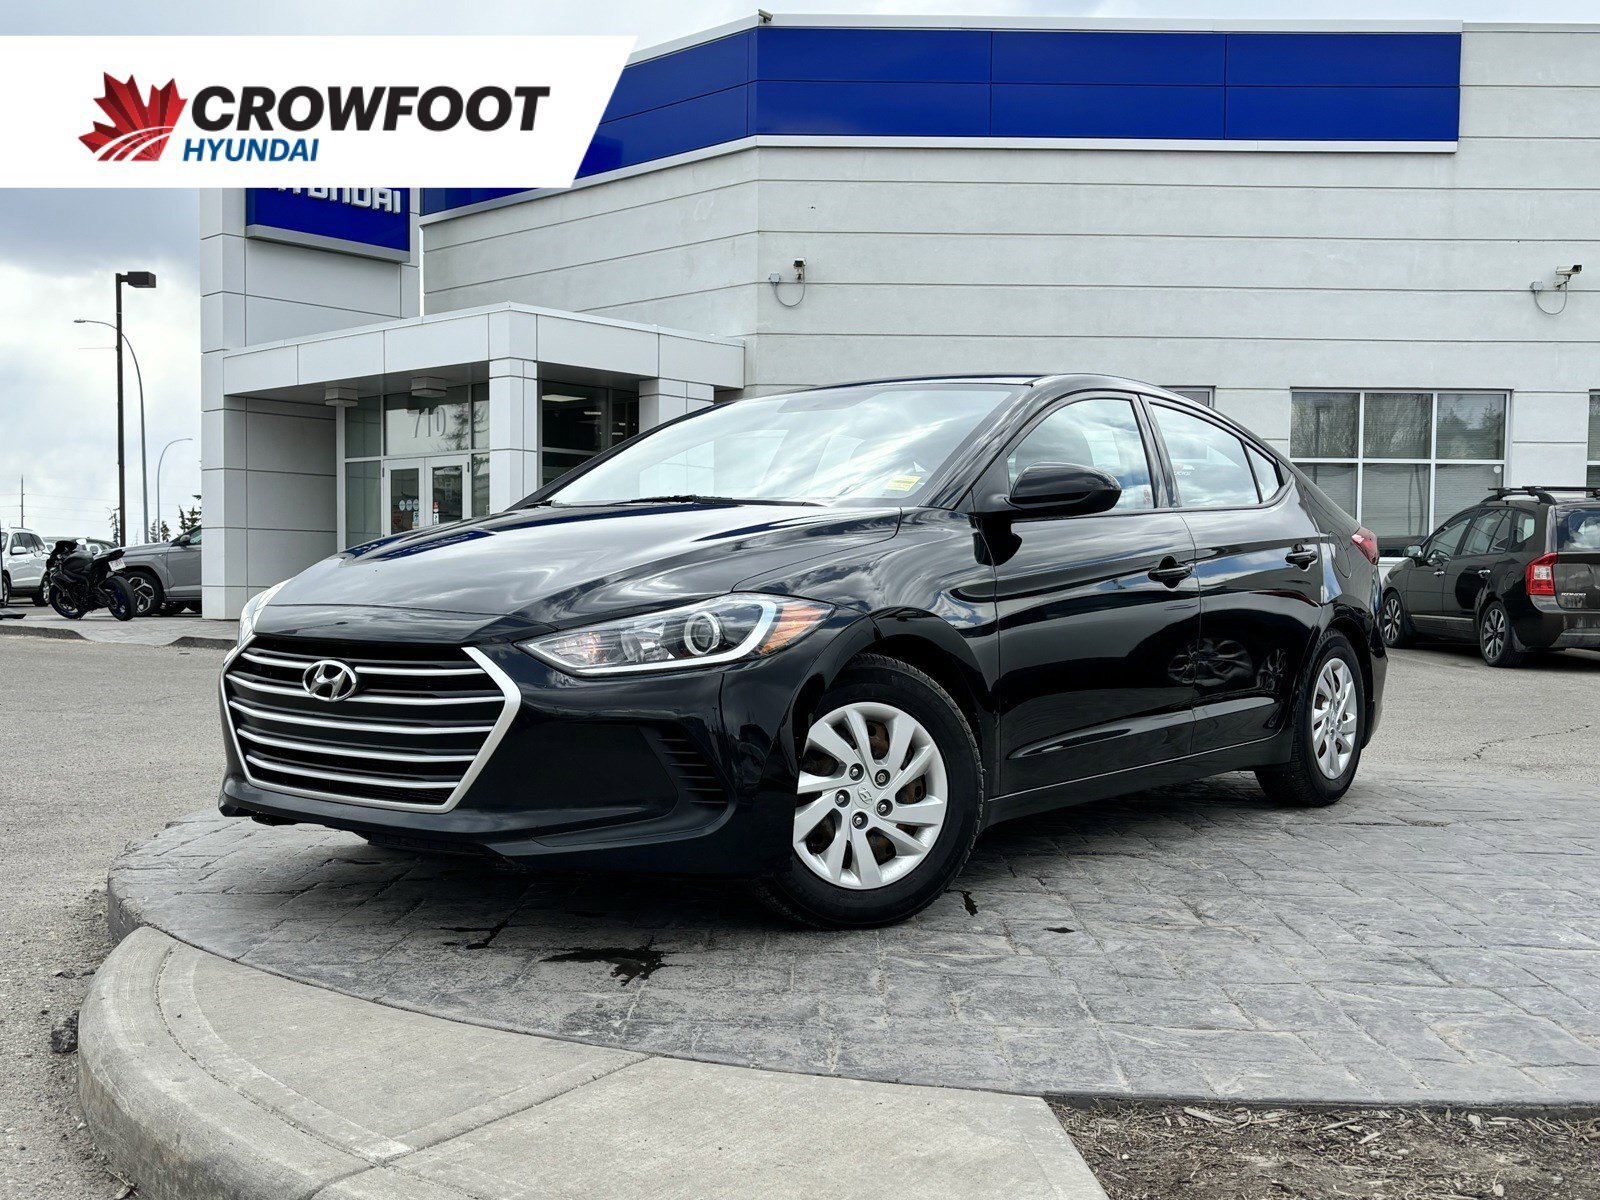 2017 Hyundai Elantra LE - 2 Sets of Tires, Remote Start, All-Weather Ma